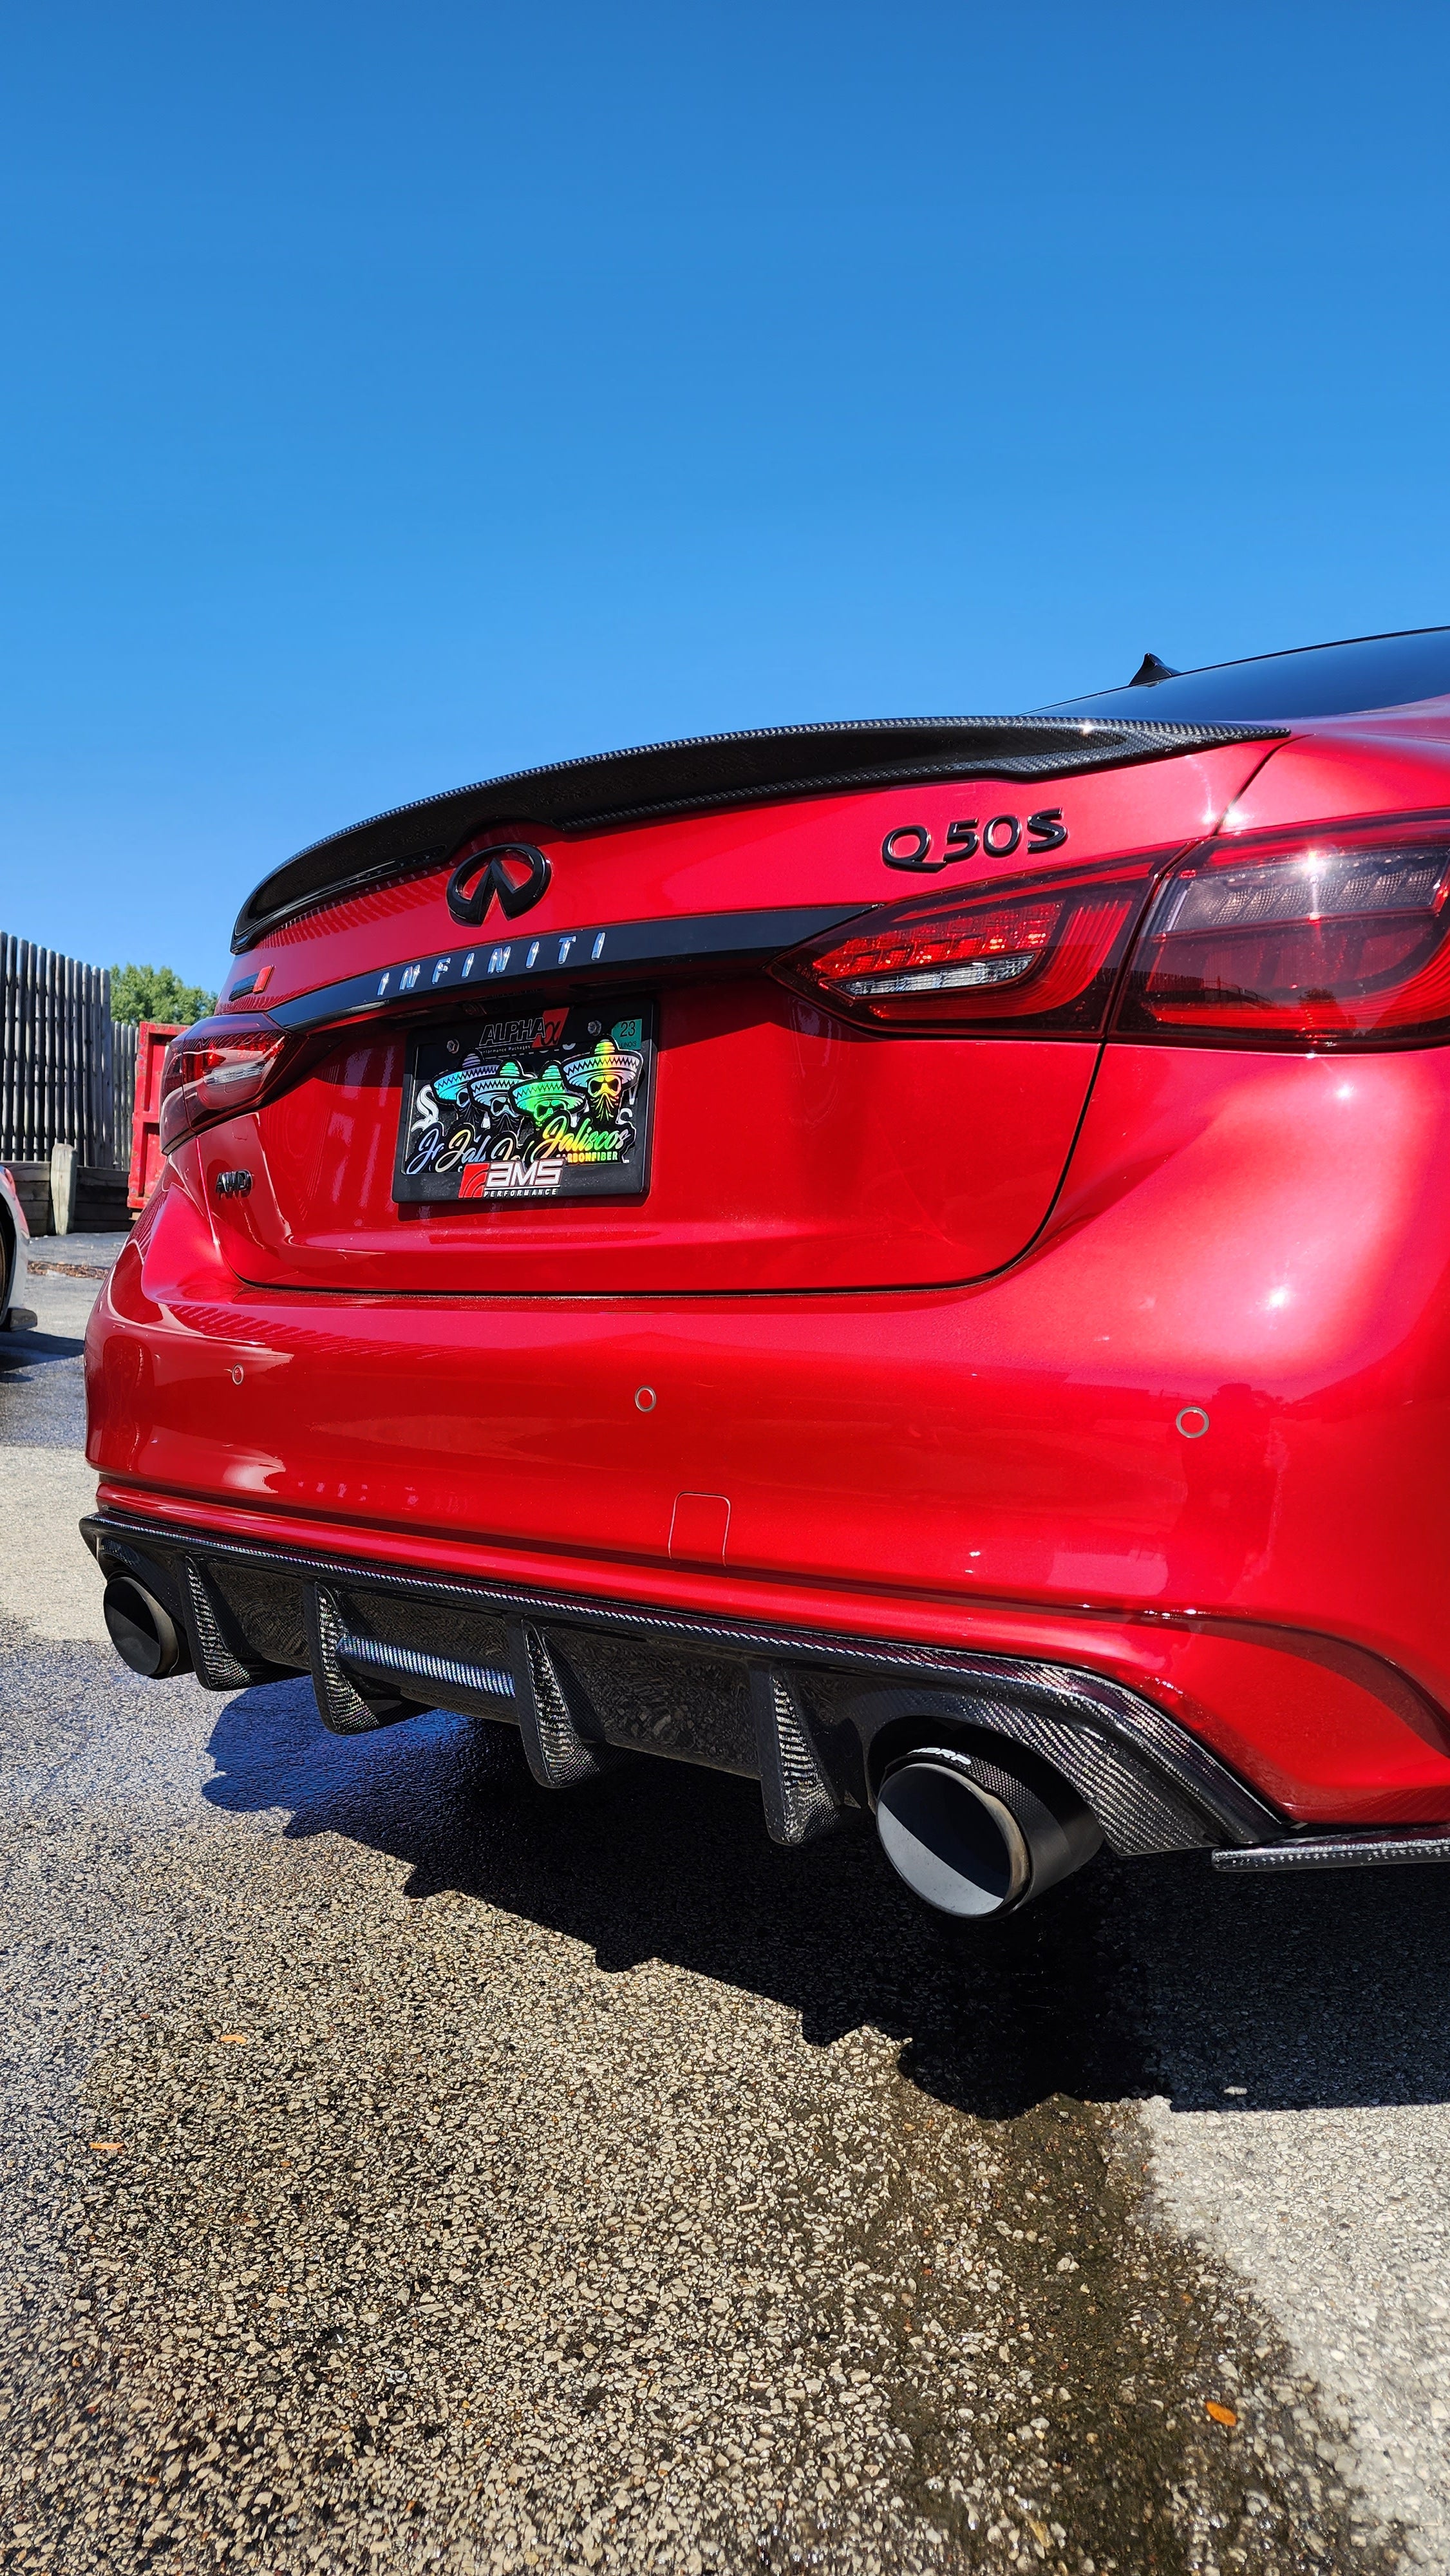 Red Infiniti Q50 2018 with Jalisco's CF Carbon Fiber 'OG' Style Diffuser, offering a unique perspective on its design